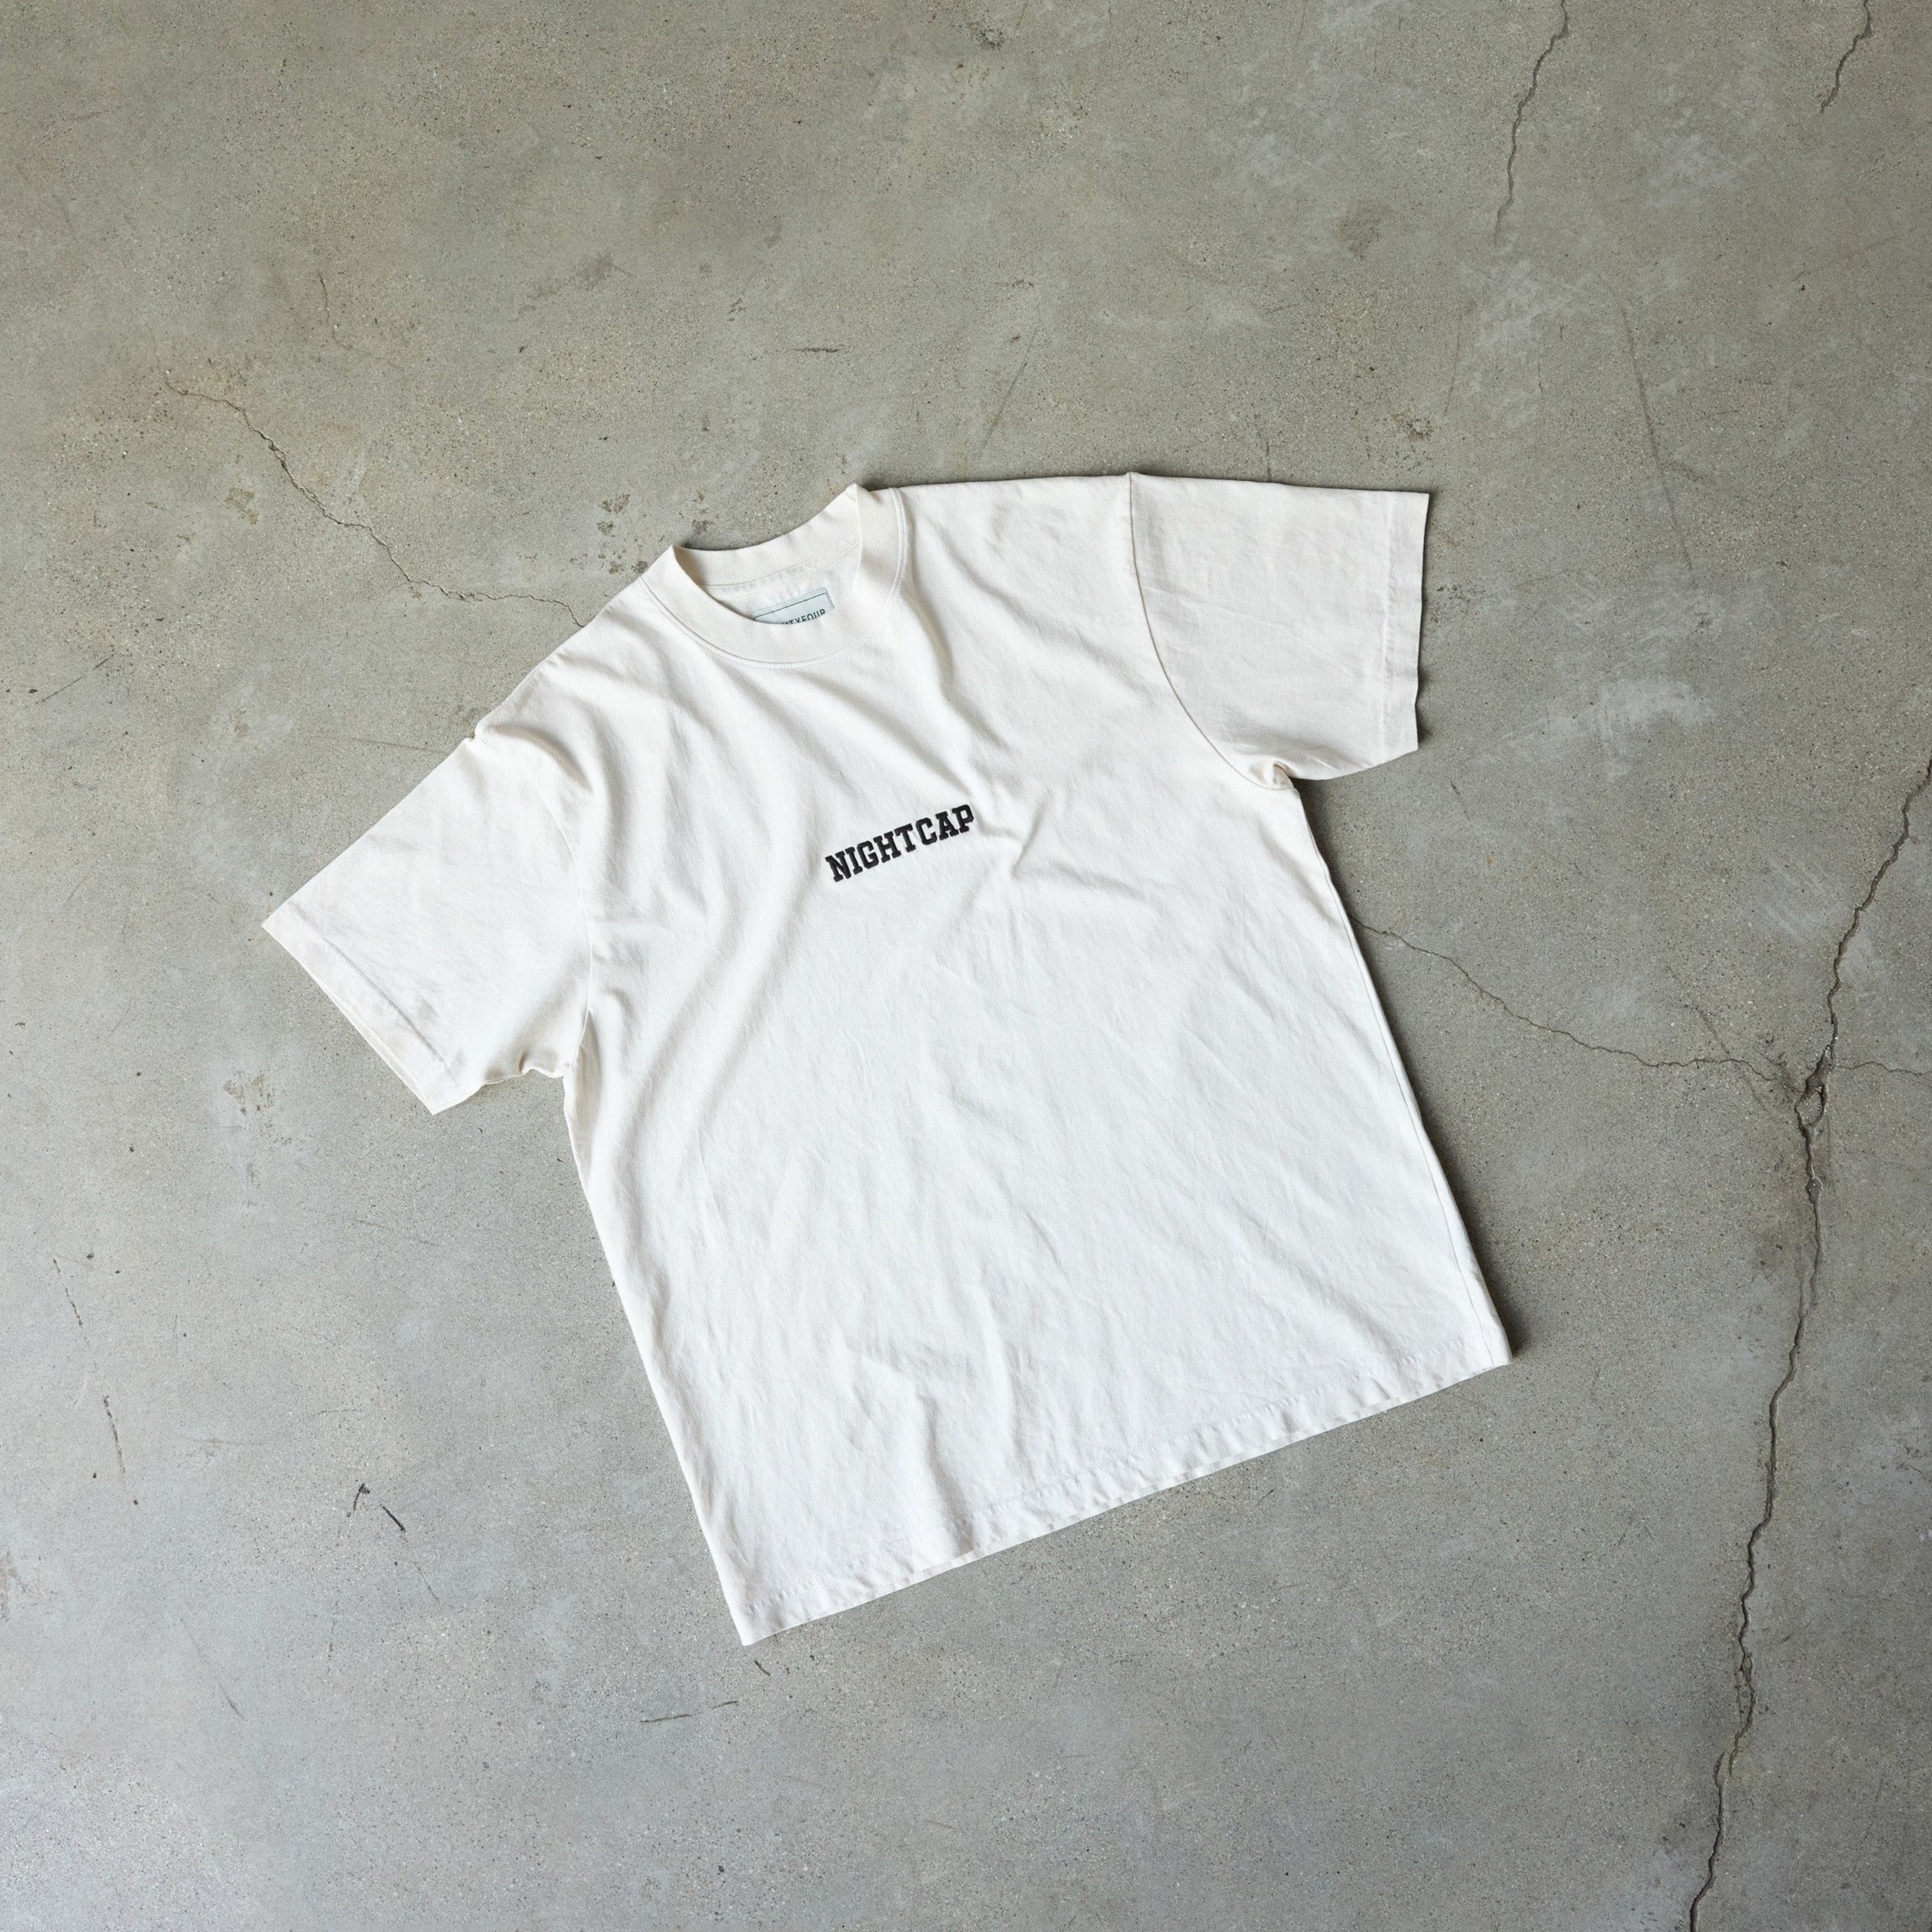 "STAY WITH ME NOW" TEE // VINTAGE WHITE